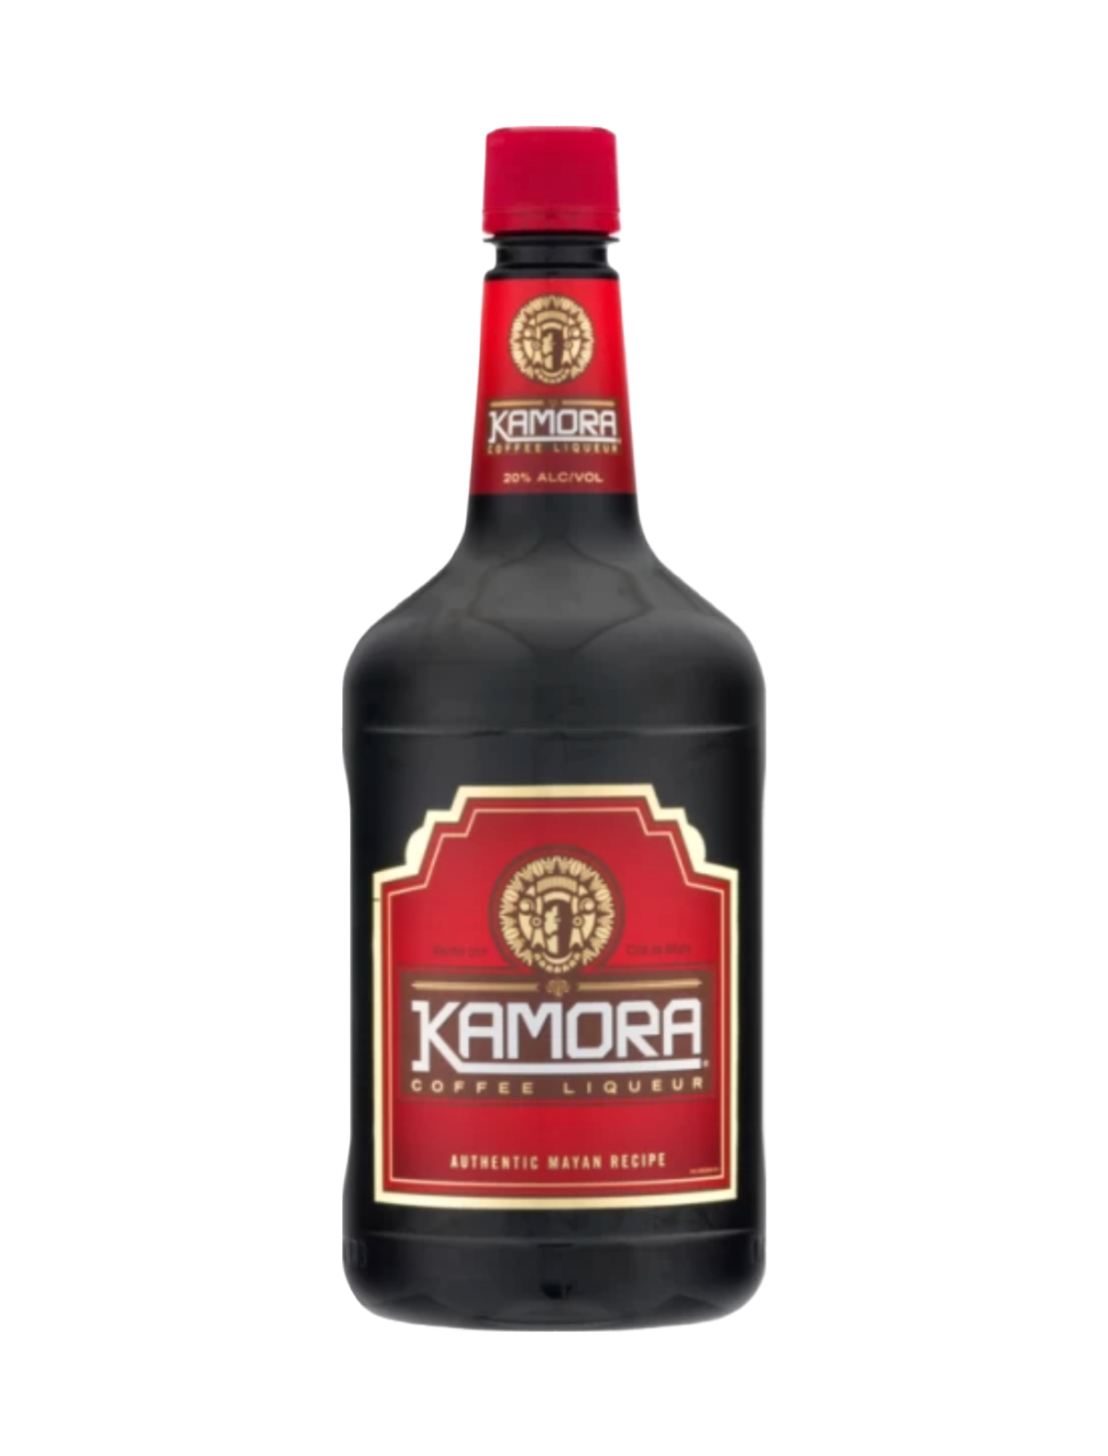 Bottle of Kamora with Red Label. Savory, decadent coffee liqueur with notes of vanilla, chocolate and caramel.